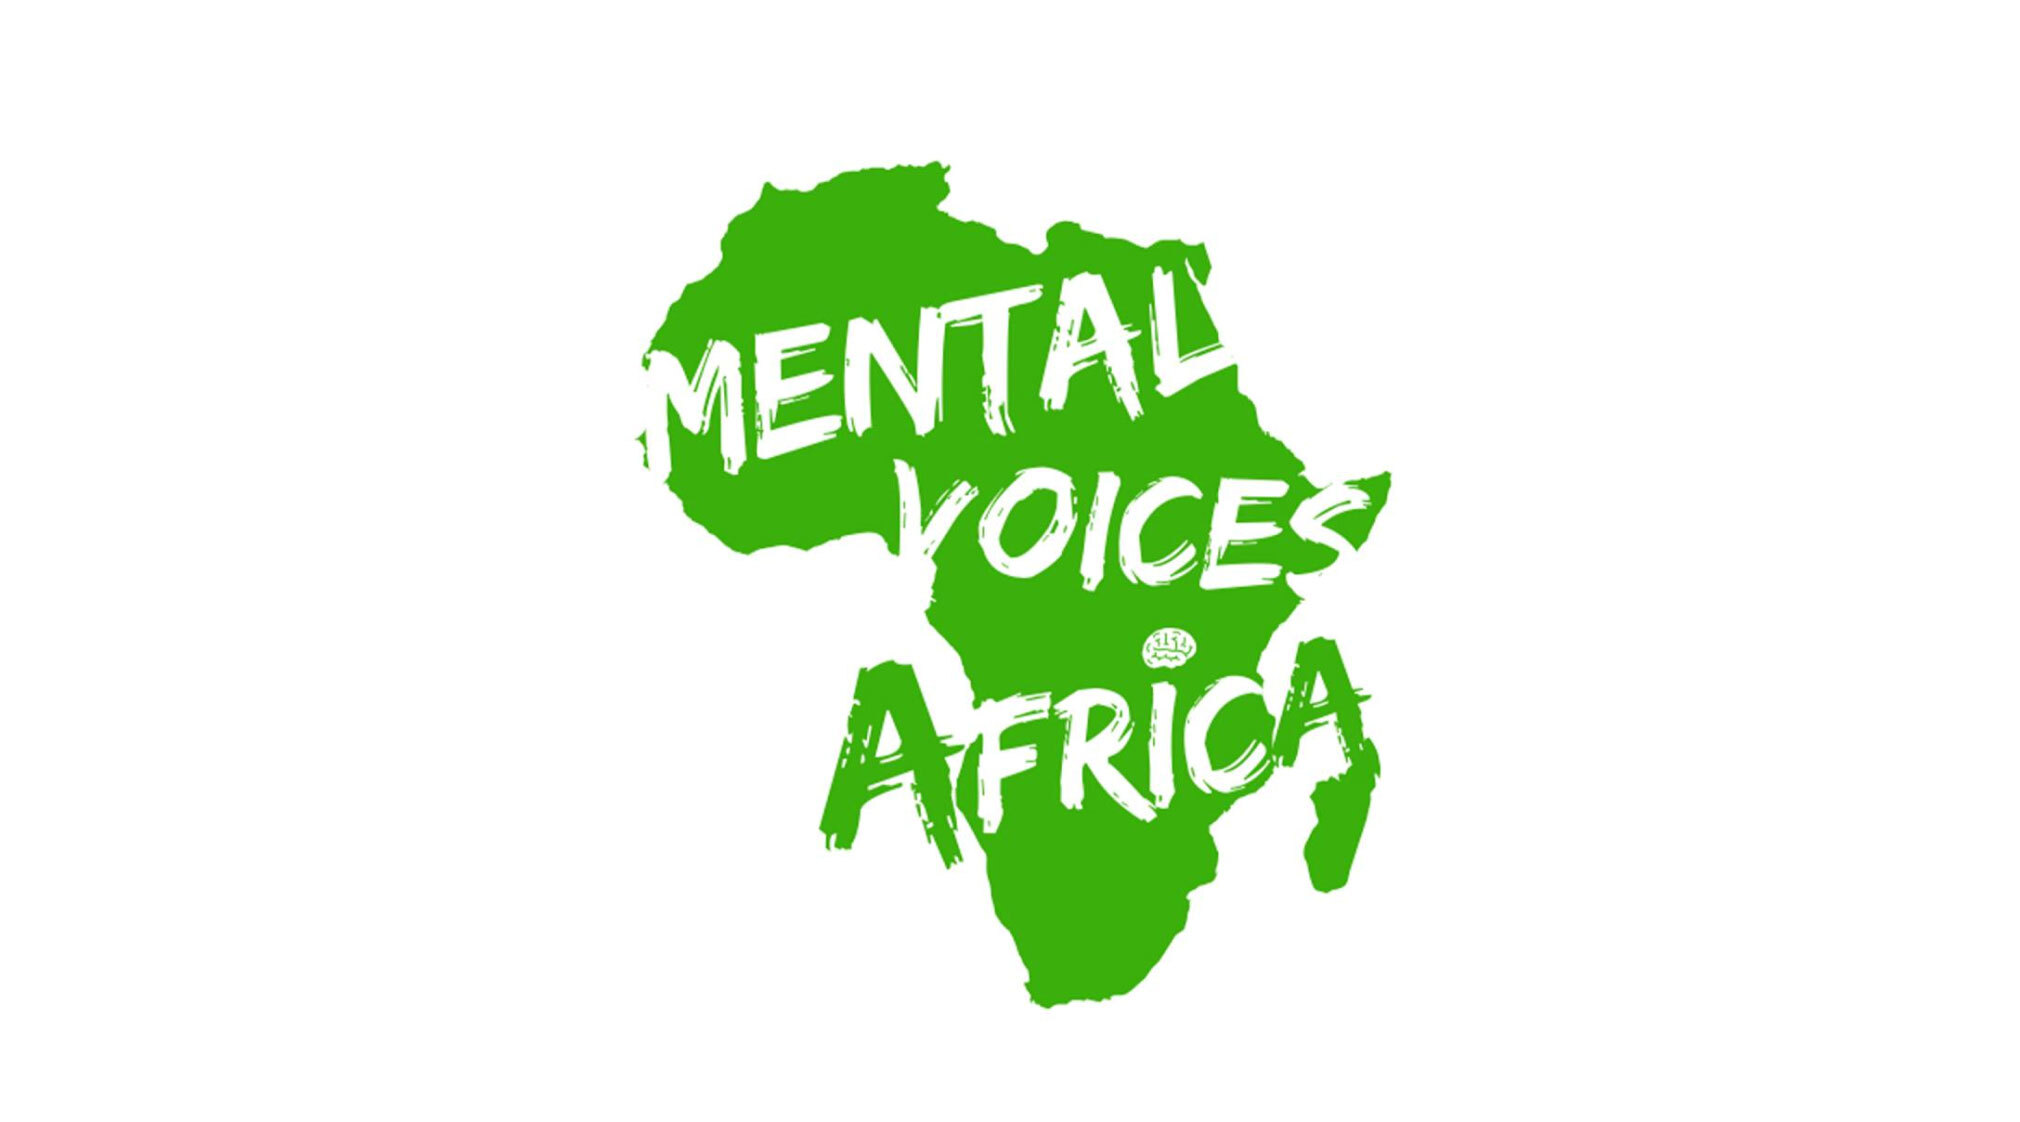 Mental Voices Africa graphic over the top of a green illustration of the continent of Africa.